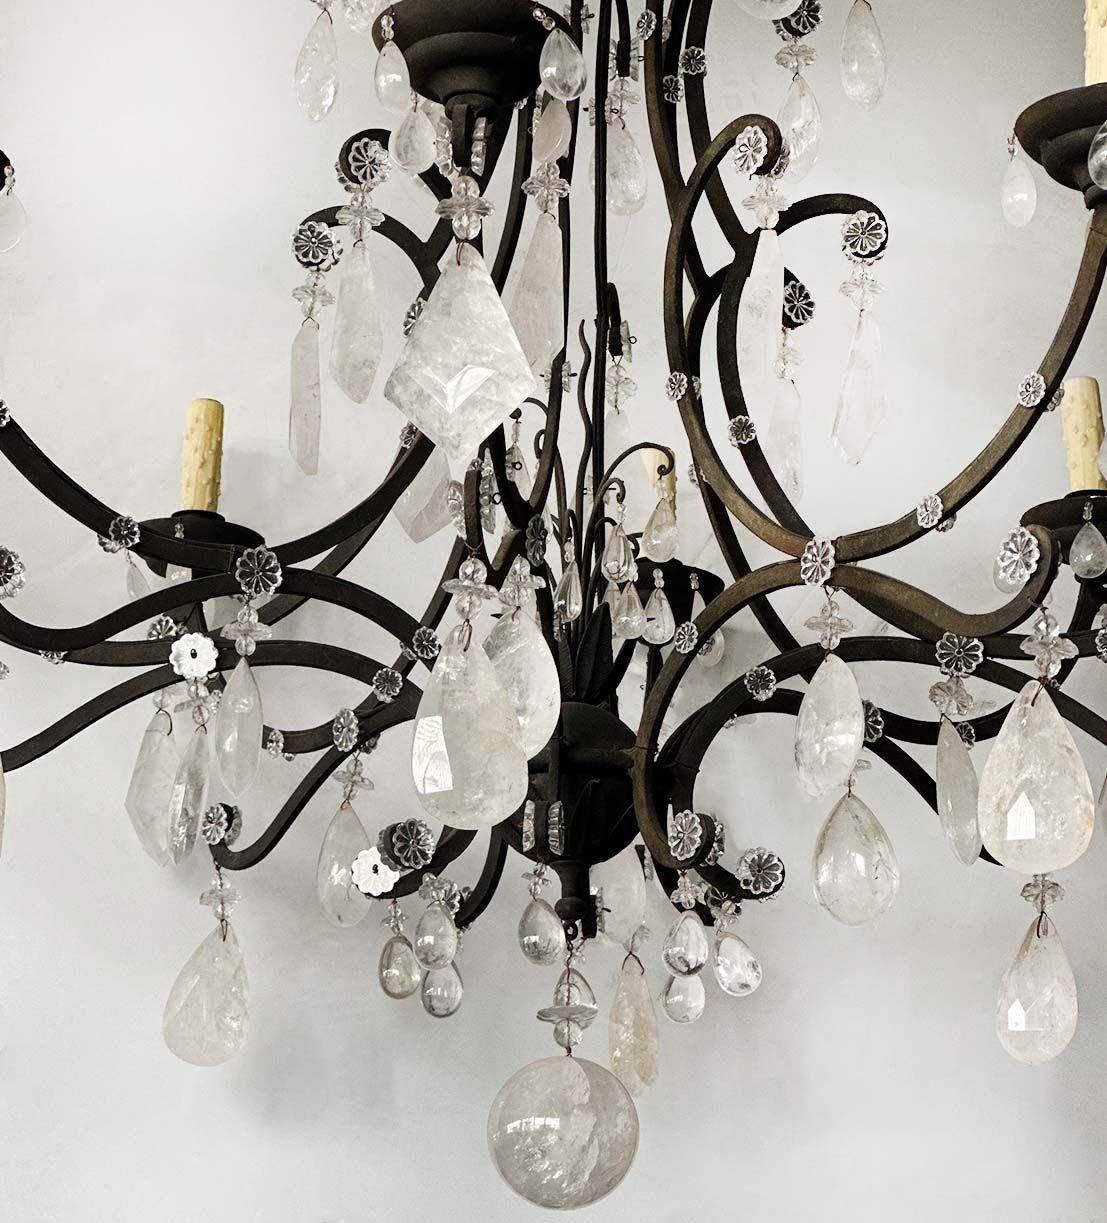 Italian Large Venetian Rock Crystal & Wrought Iron Chandelier, Italy, c. 1950's For Sale